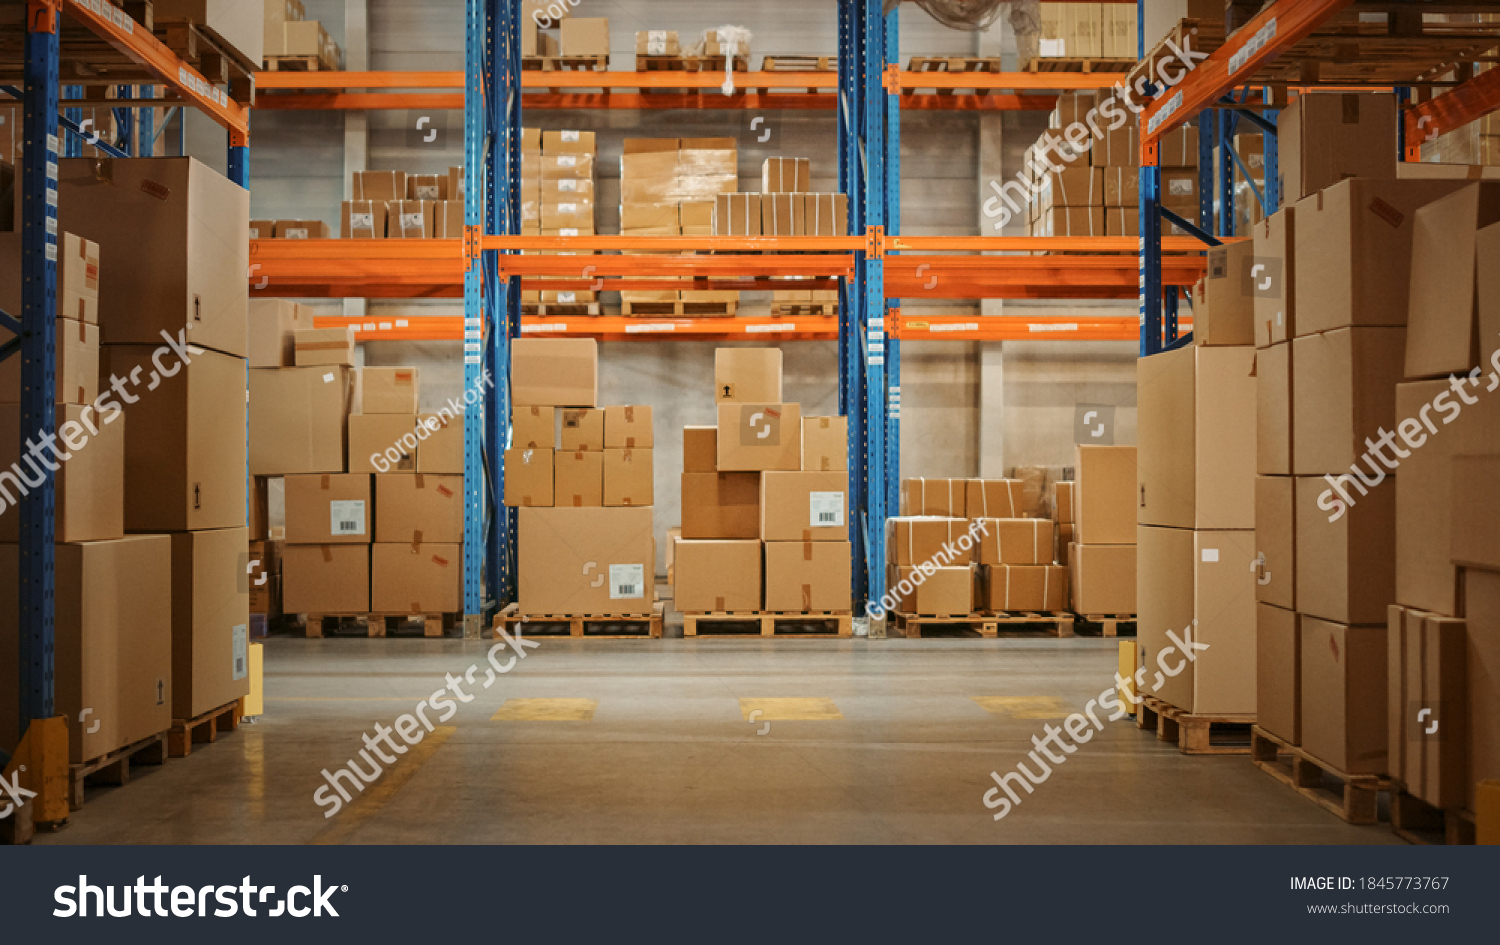 Gigantic Sunny Retail Warehouse full of Shelves with Goods in Cardboard Boxes. Logistics and Distribution Storehouse Center for further Product Delivery Packages. Front Camera View #1845773767